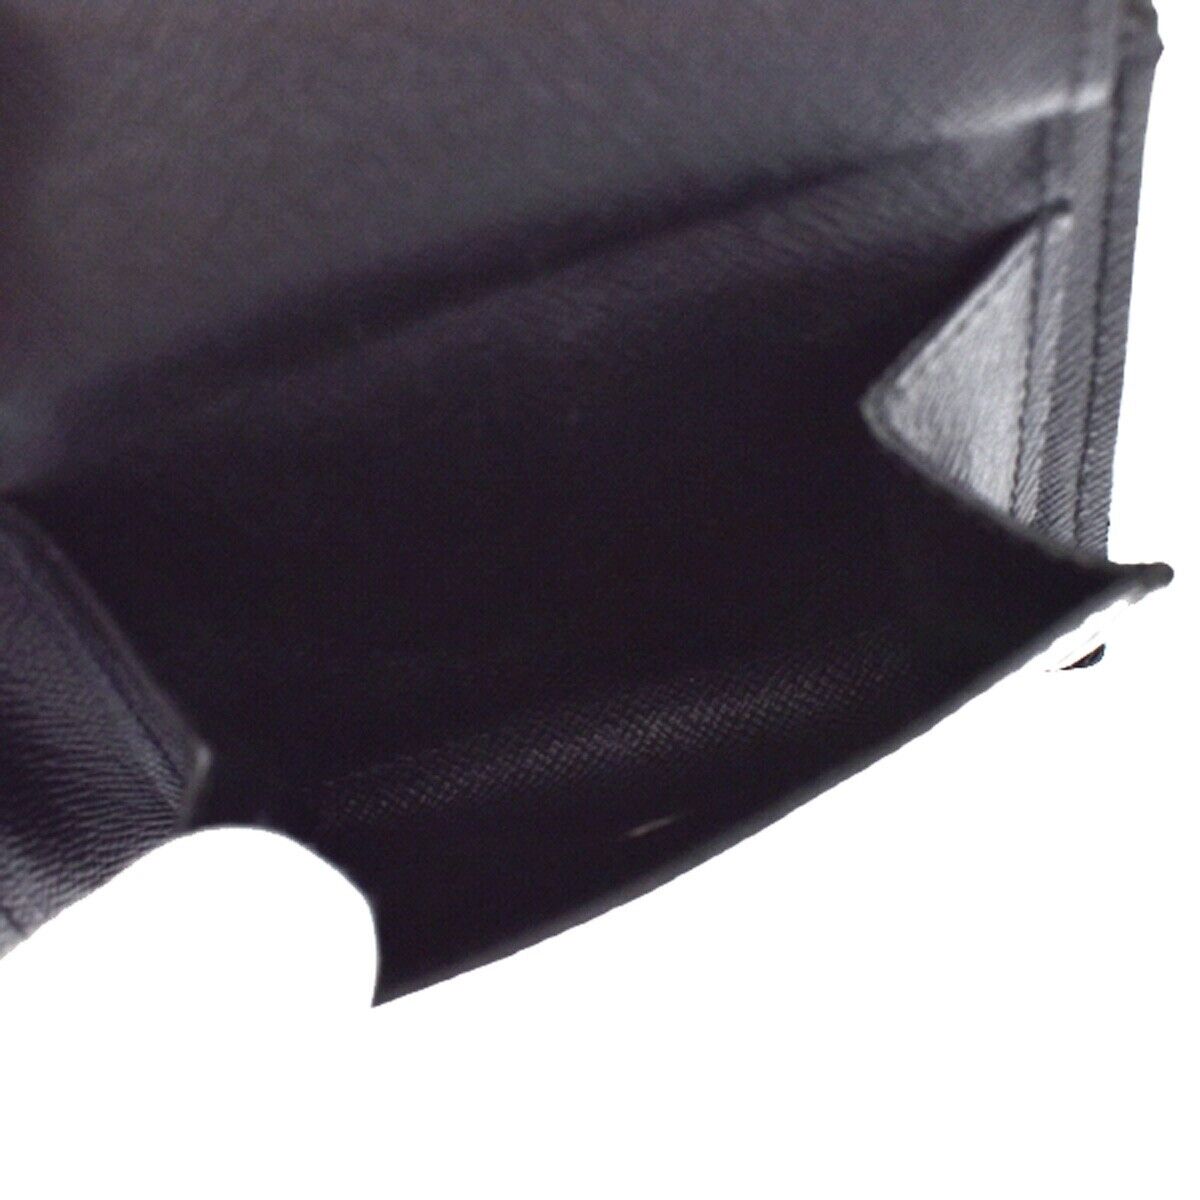 Pre-owned Louis Vuitton Portefeuille Marco Black Leather Wallet  ()